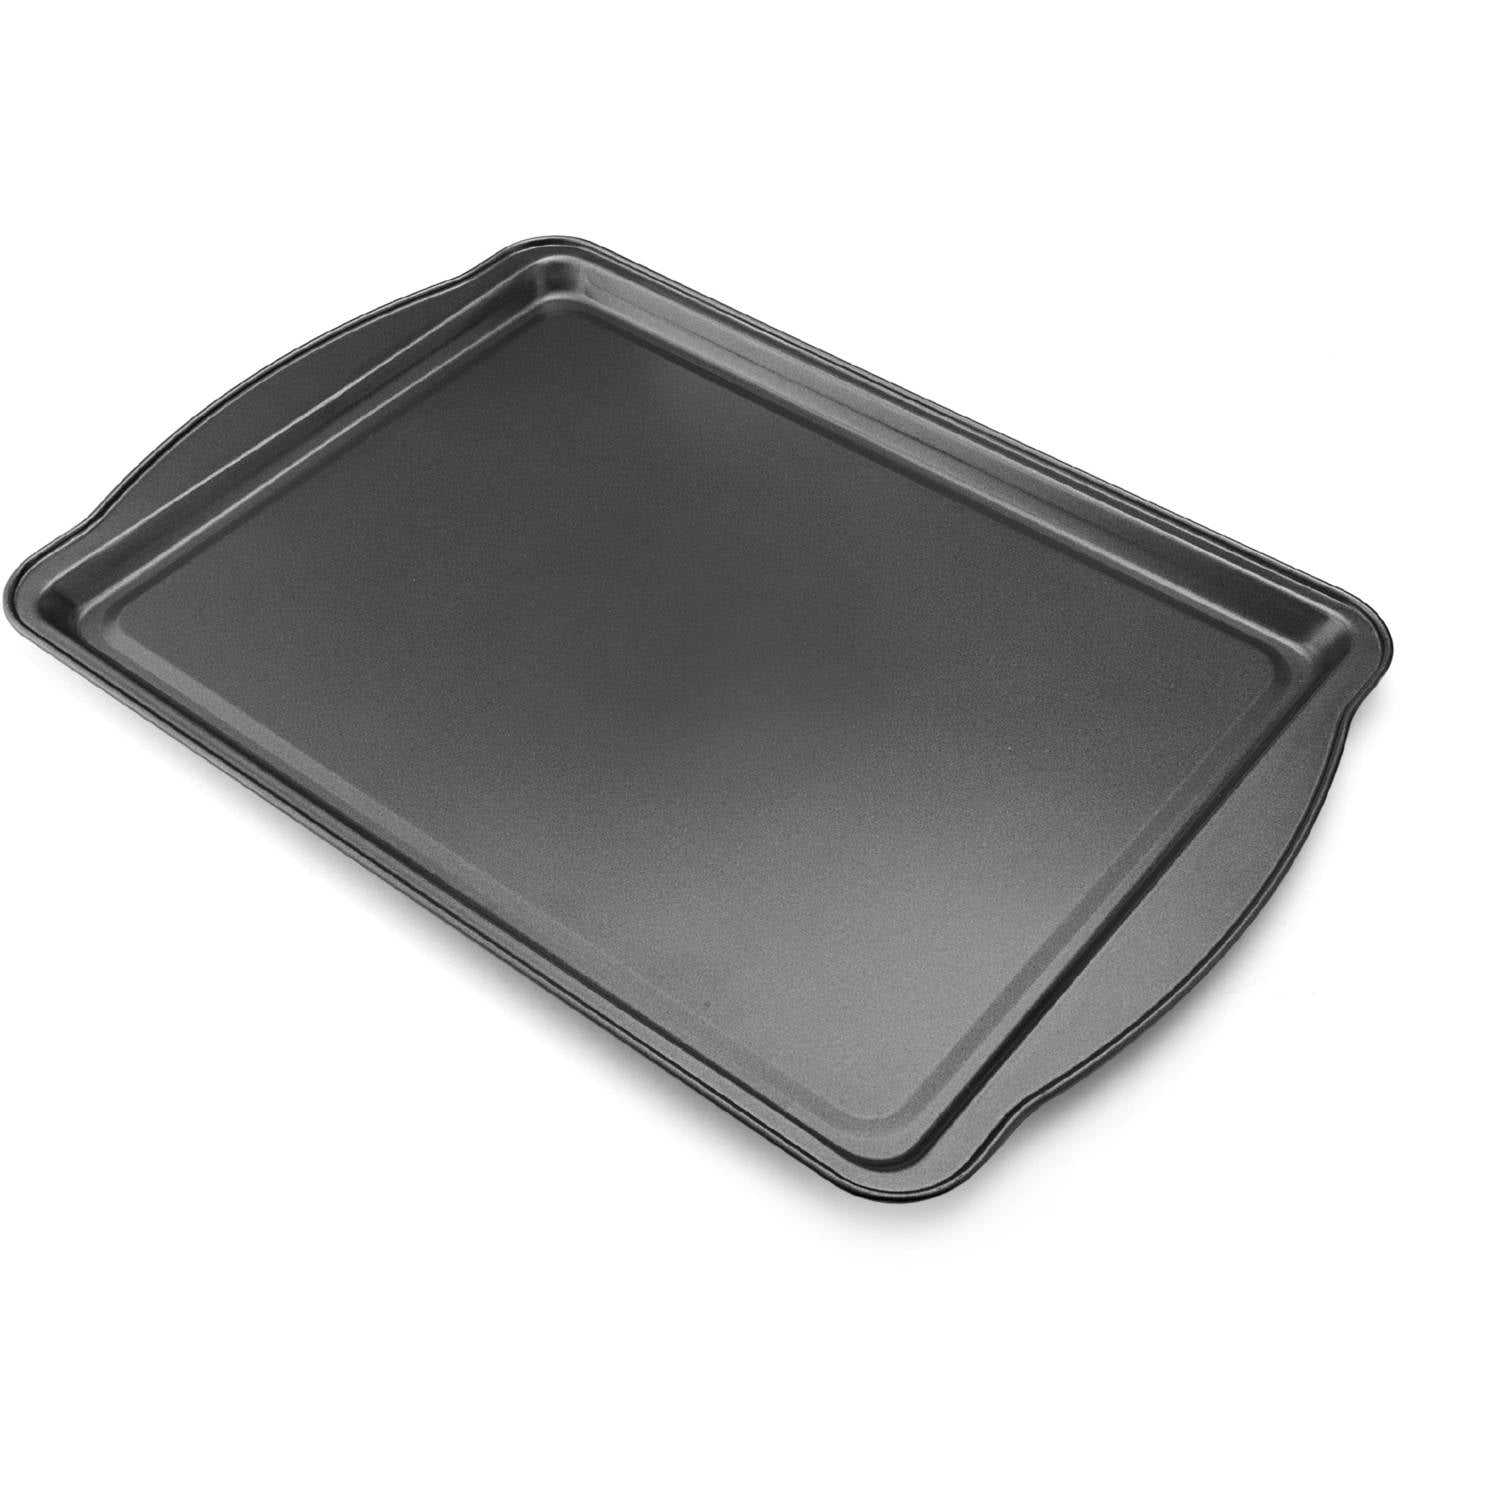 24 inch cookie sheet